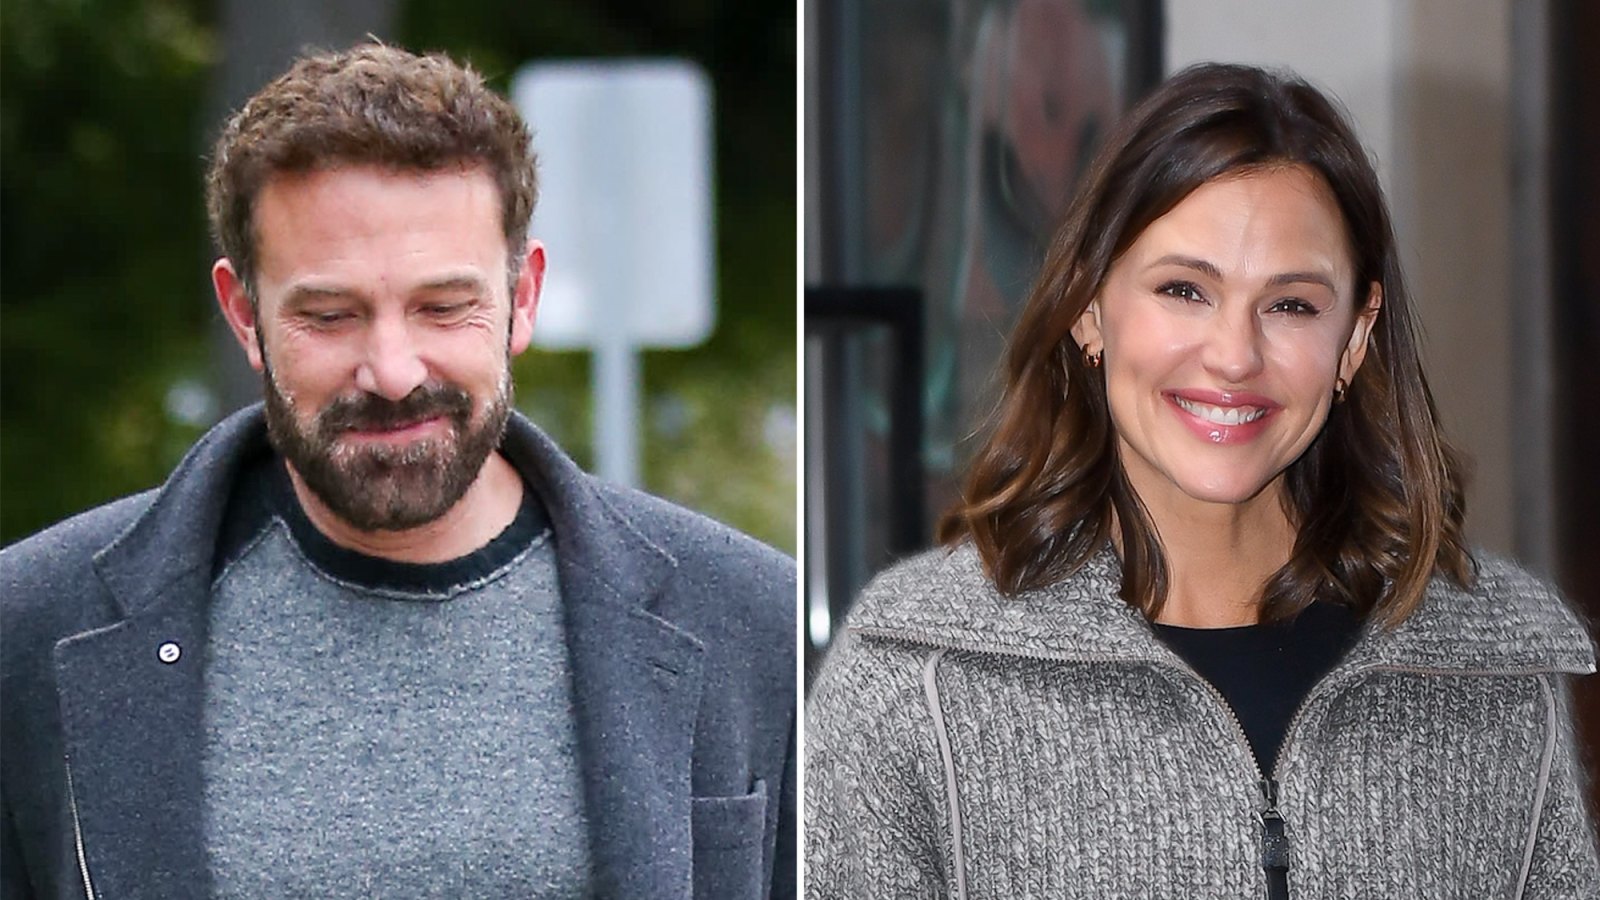 Ben Affleck and Jennifer Garner Are All Smiles During a Los Angeles Outing Together